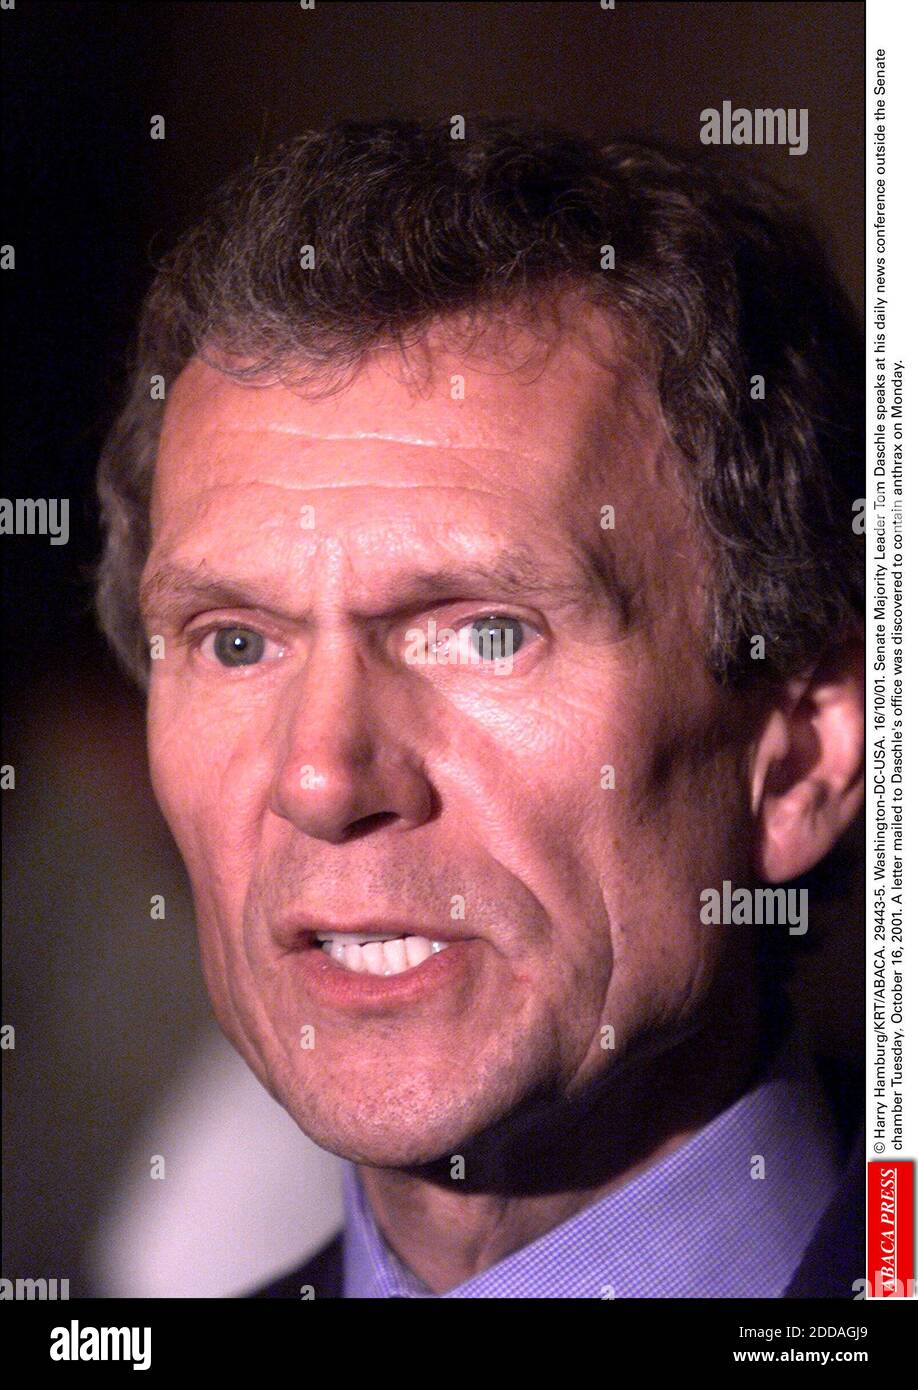 NO FILM, NO VIDEO, NO TV, NO DOCUMENTARY - © Harry Hamburg/KRT/ABACA. 29443-5. Washington-DC-USA. 16/10/01. Senate Majority Leader Thomas Daschle speaks at his daily news conference outside the Senate chamber Tuesday, October 16, 2001. A letter mailed to Daschle's office was discovered to contain Stock Photo